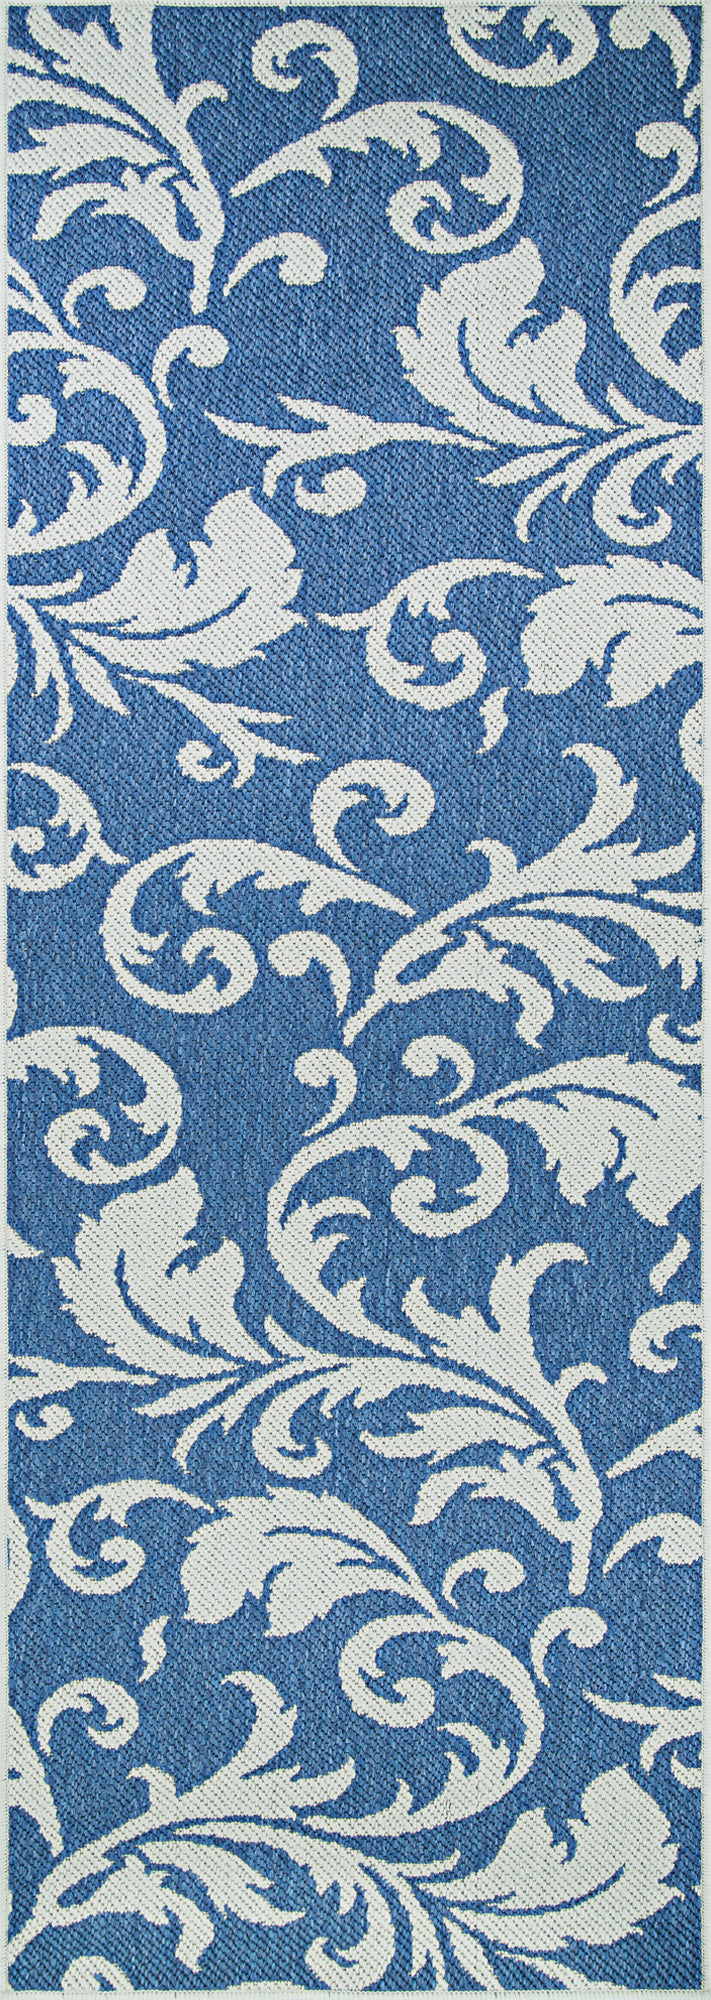 Couristan Outdurables Vineyards Sea and Dune Area Rug